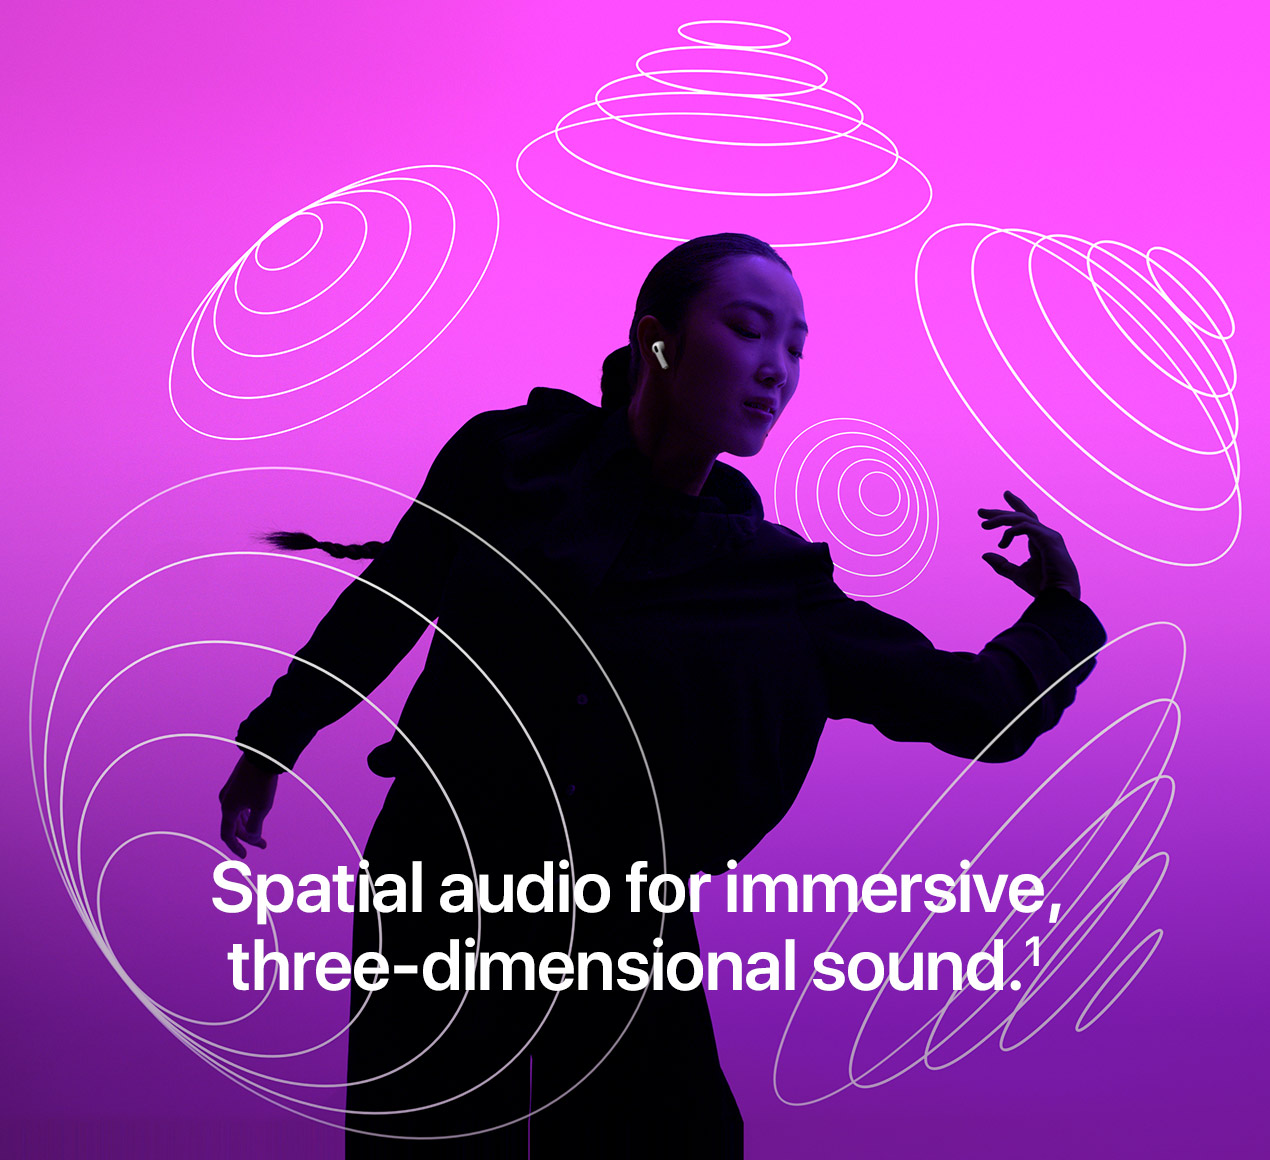 Spatial audio for immersive, three-dimensional sound.(1)